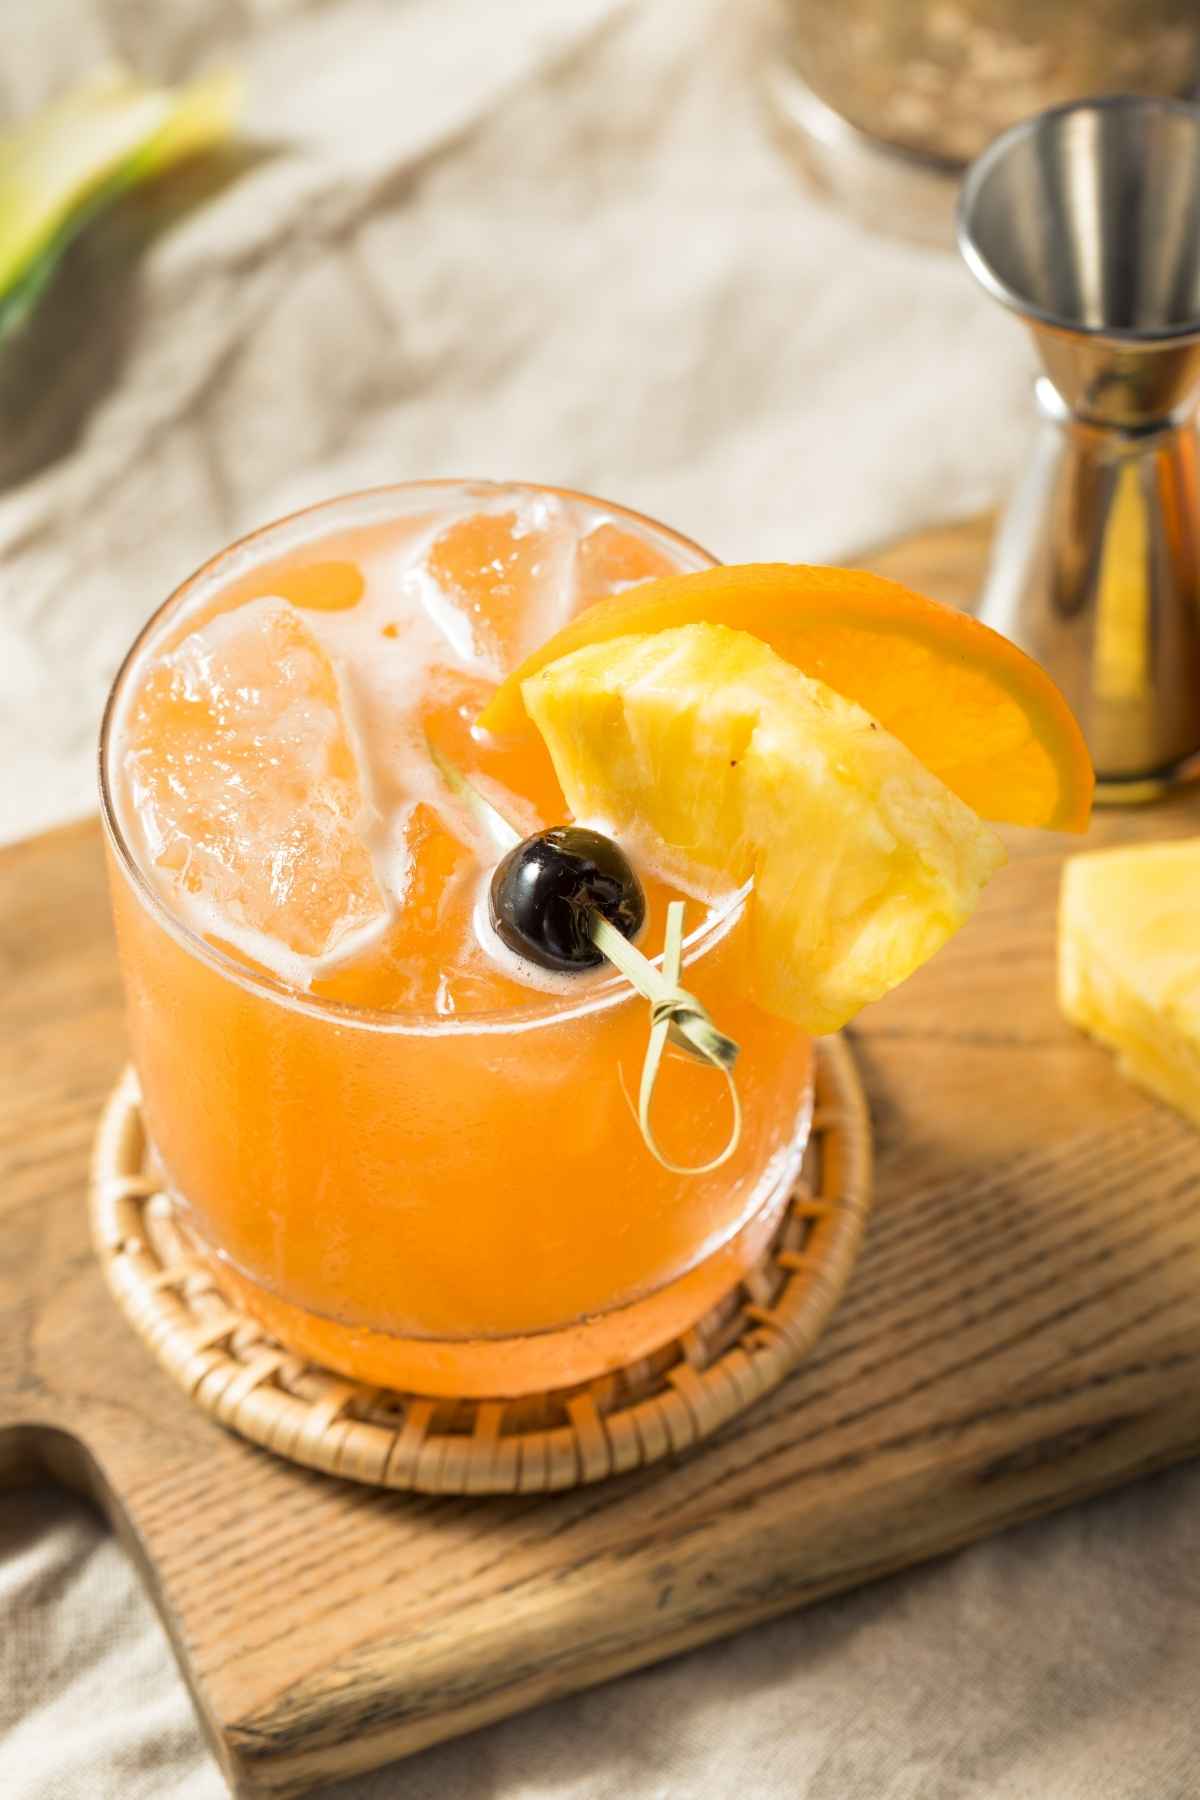 Run To Your “Happy Place” With Tribe’s CBD Rum Runner Cocktail